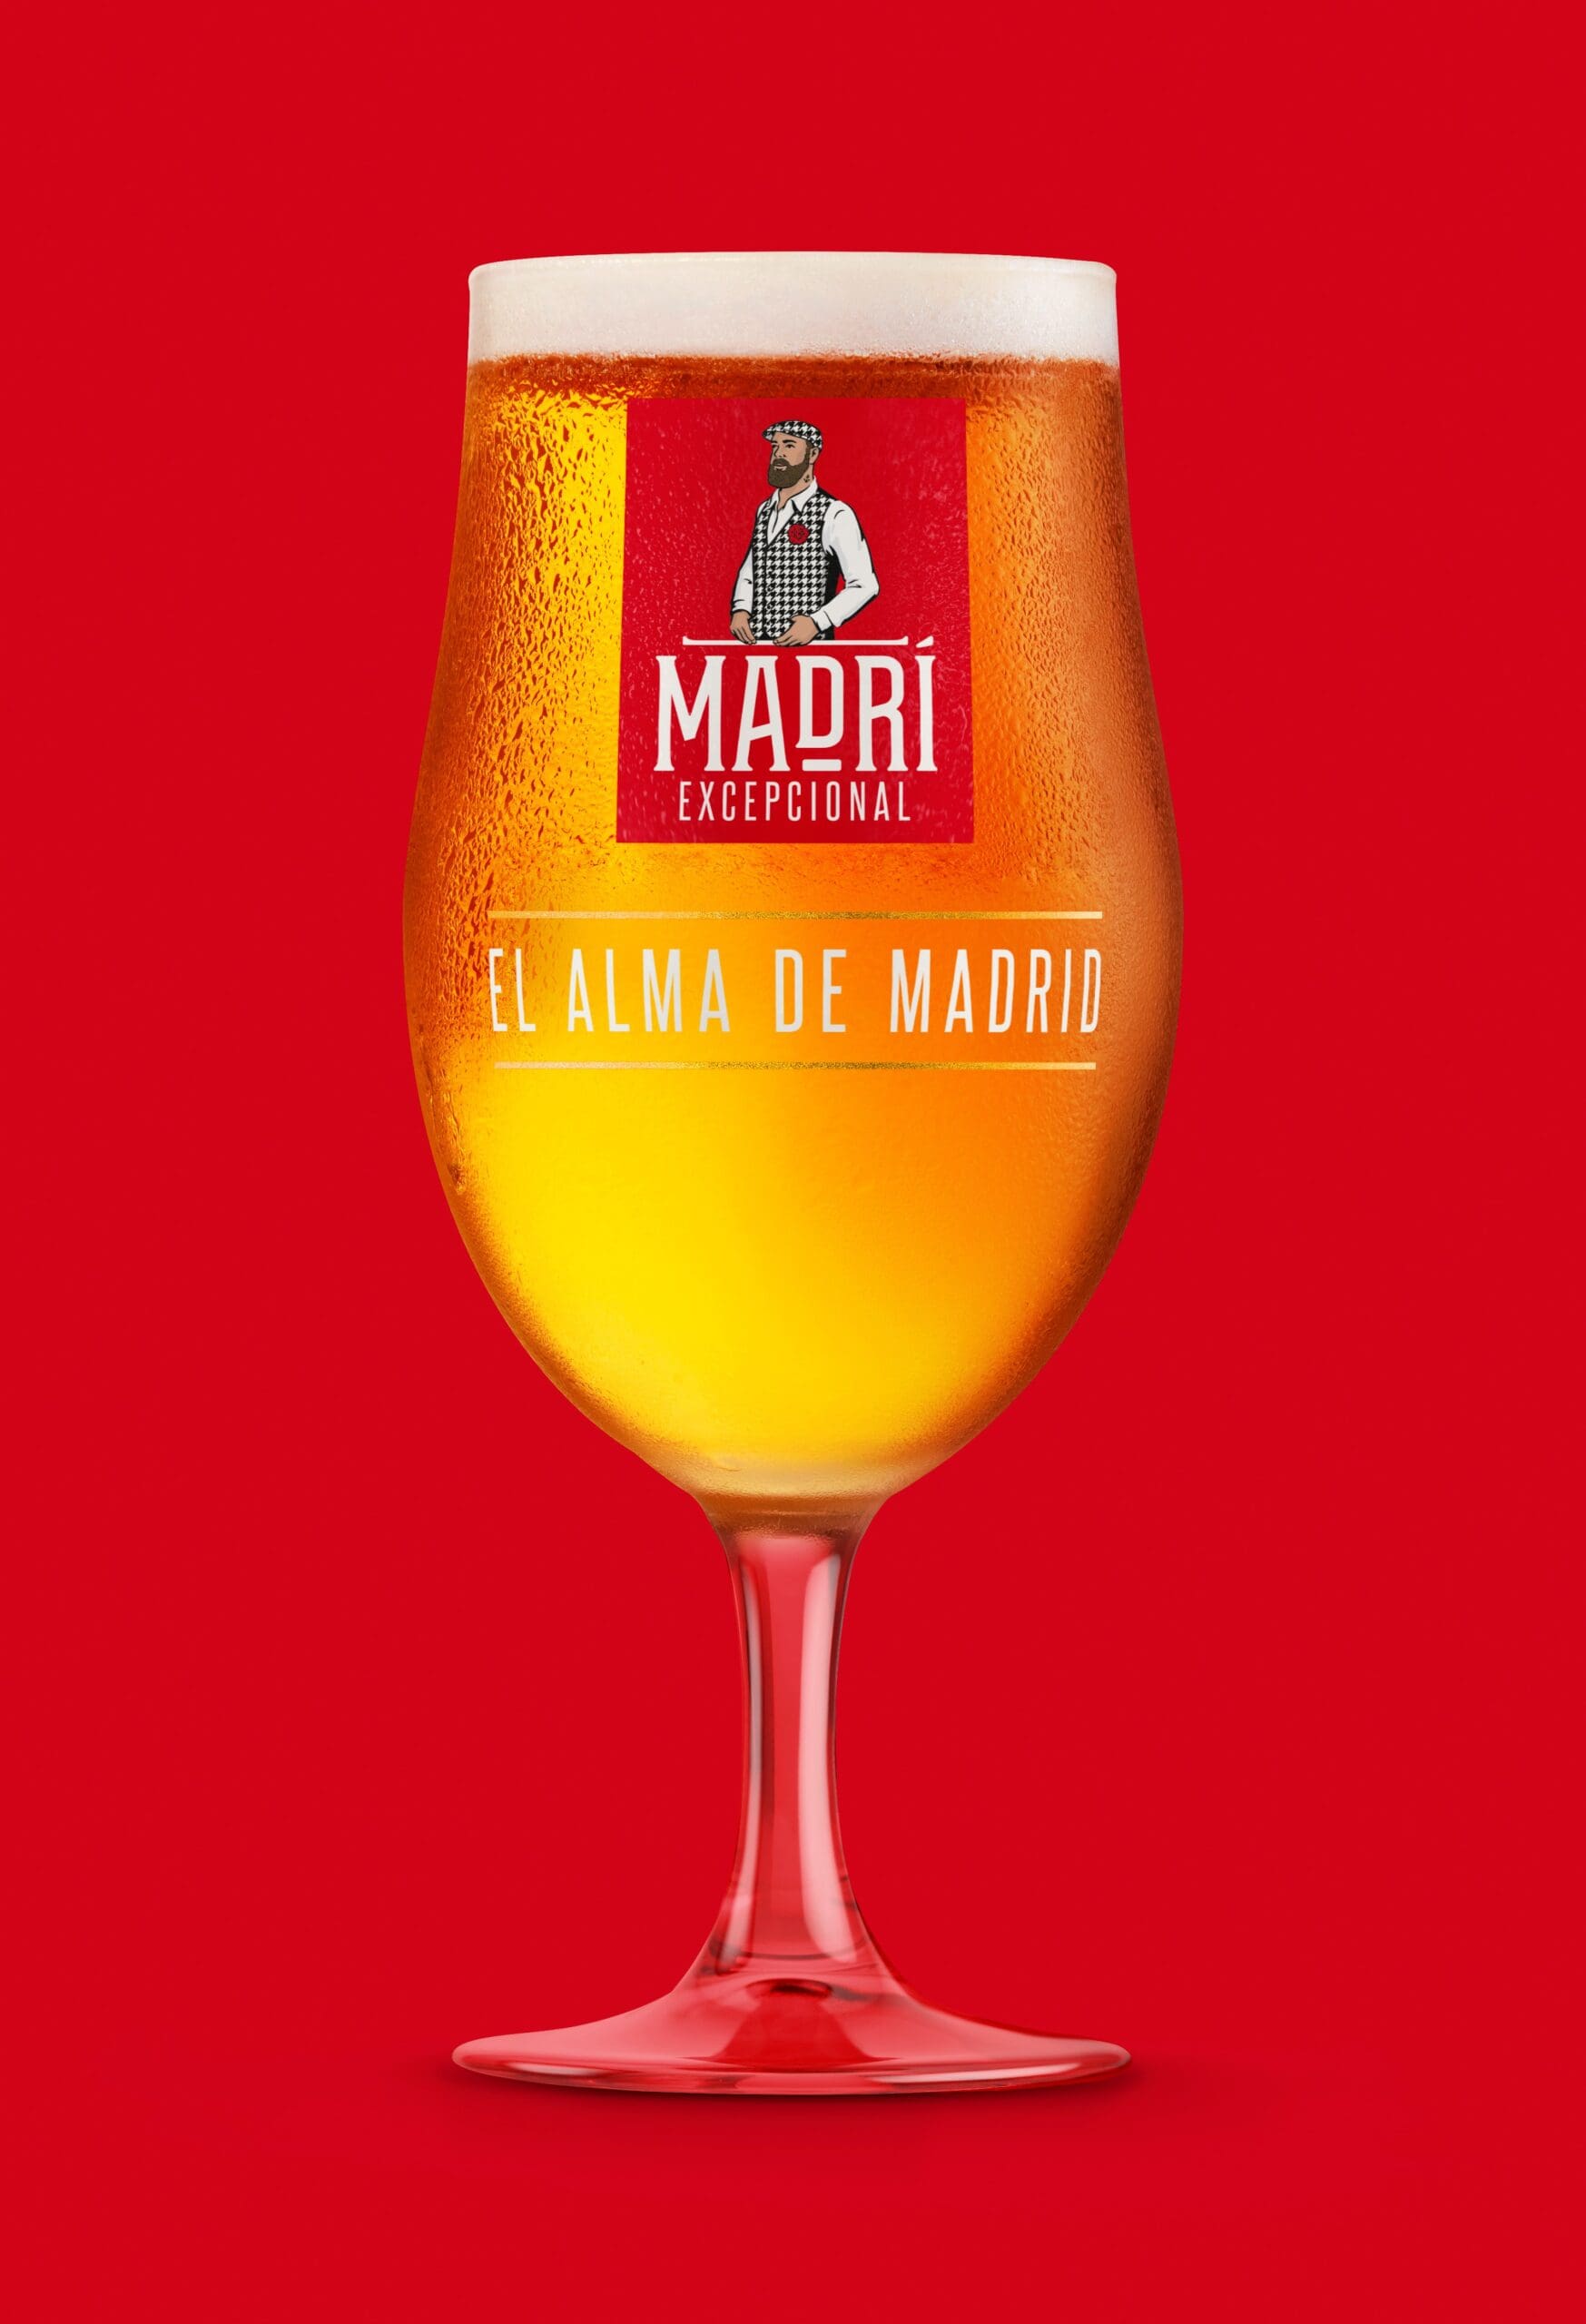 Molson Coors’ MadrÍ Excepcional Secures More Than 4 500 On Trade Customers In First Year The